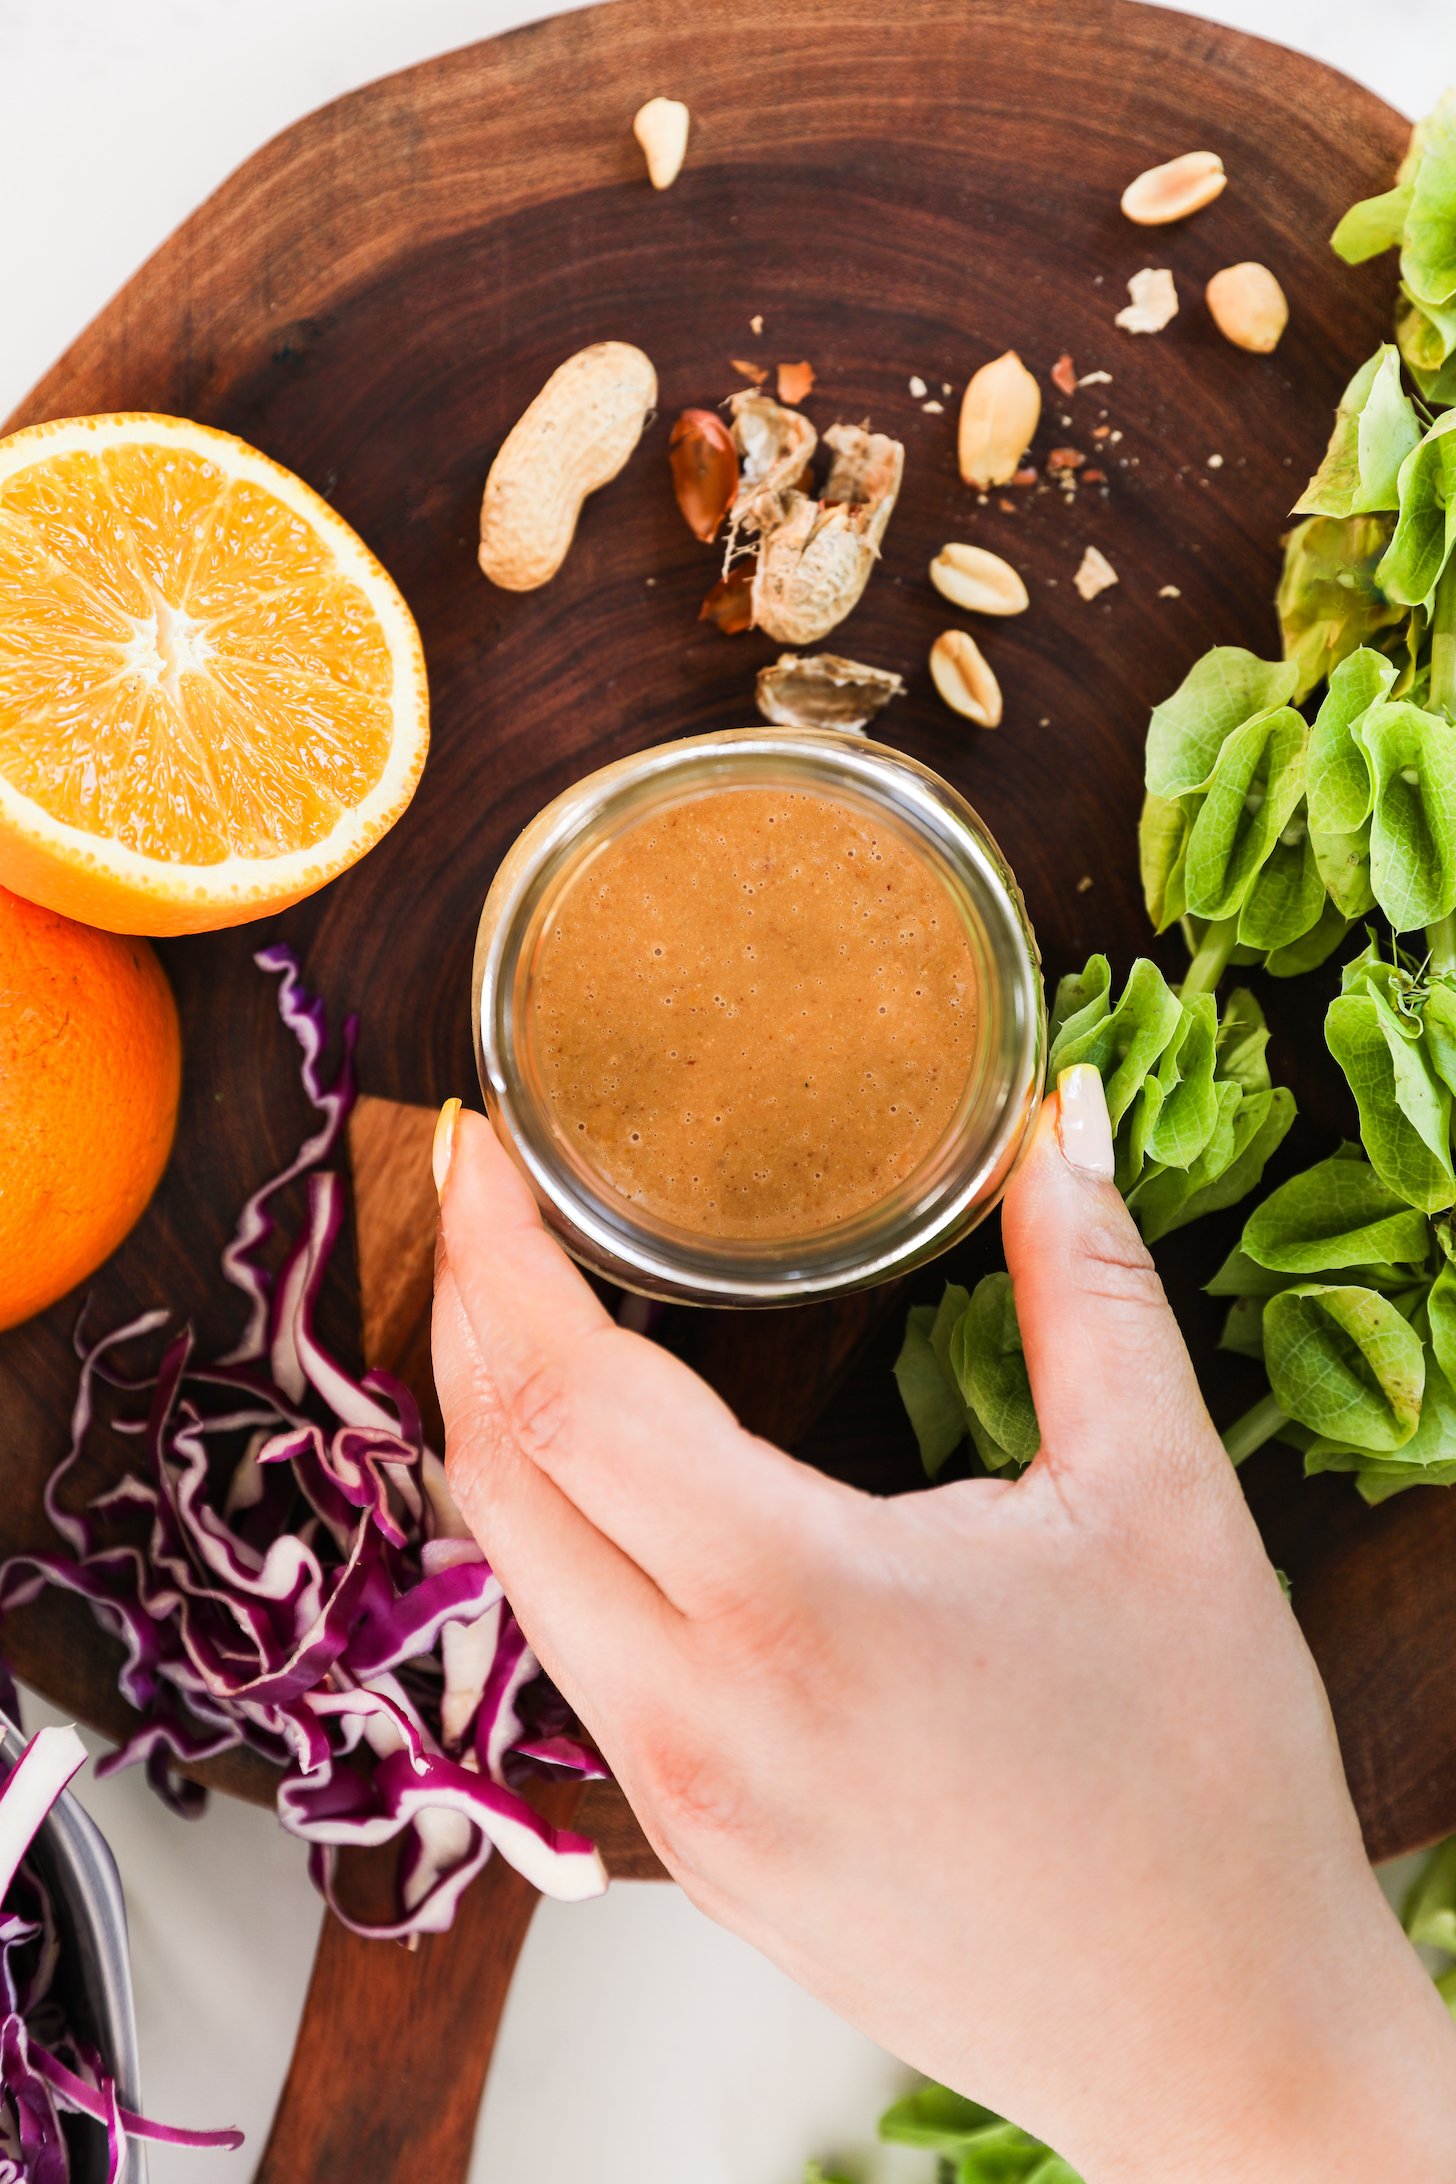 A hand holding a small jar of dressing surrounded by an orange half, peanuts, sliced cabbage and a green plant.